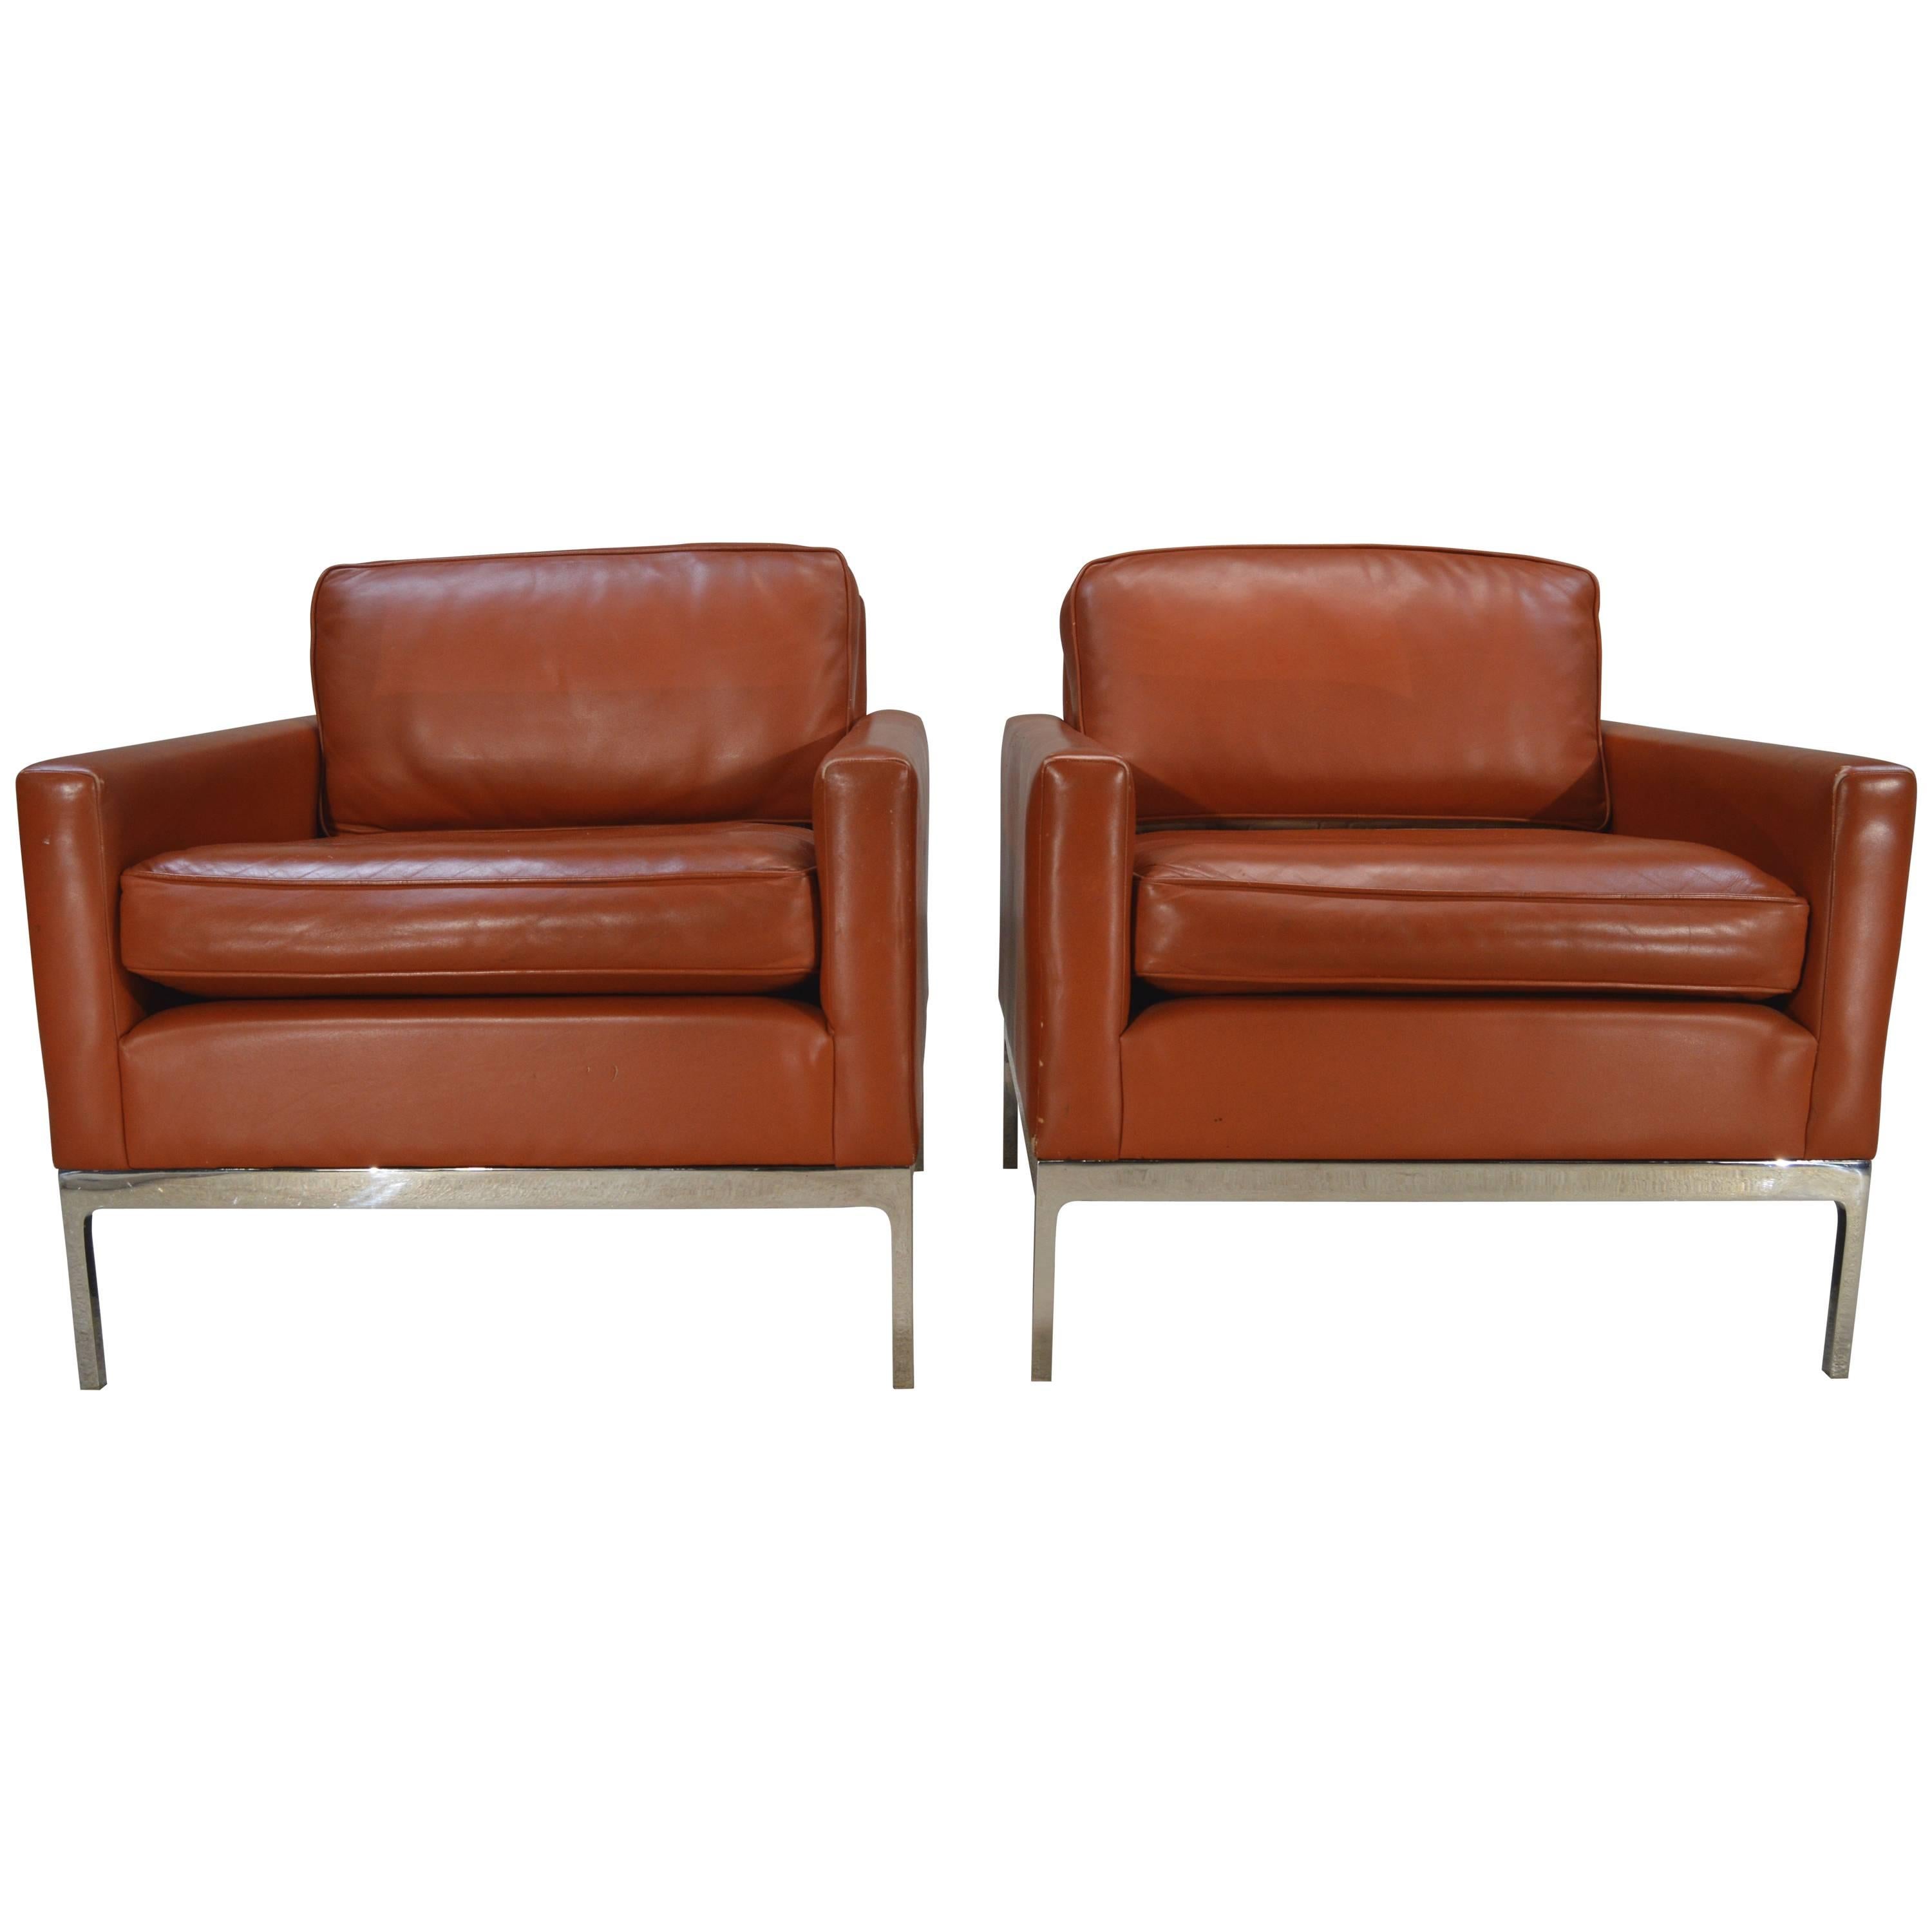 Nicos Zographos Soft Leather Club Lounge Chairs